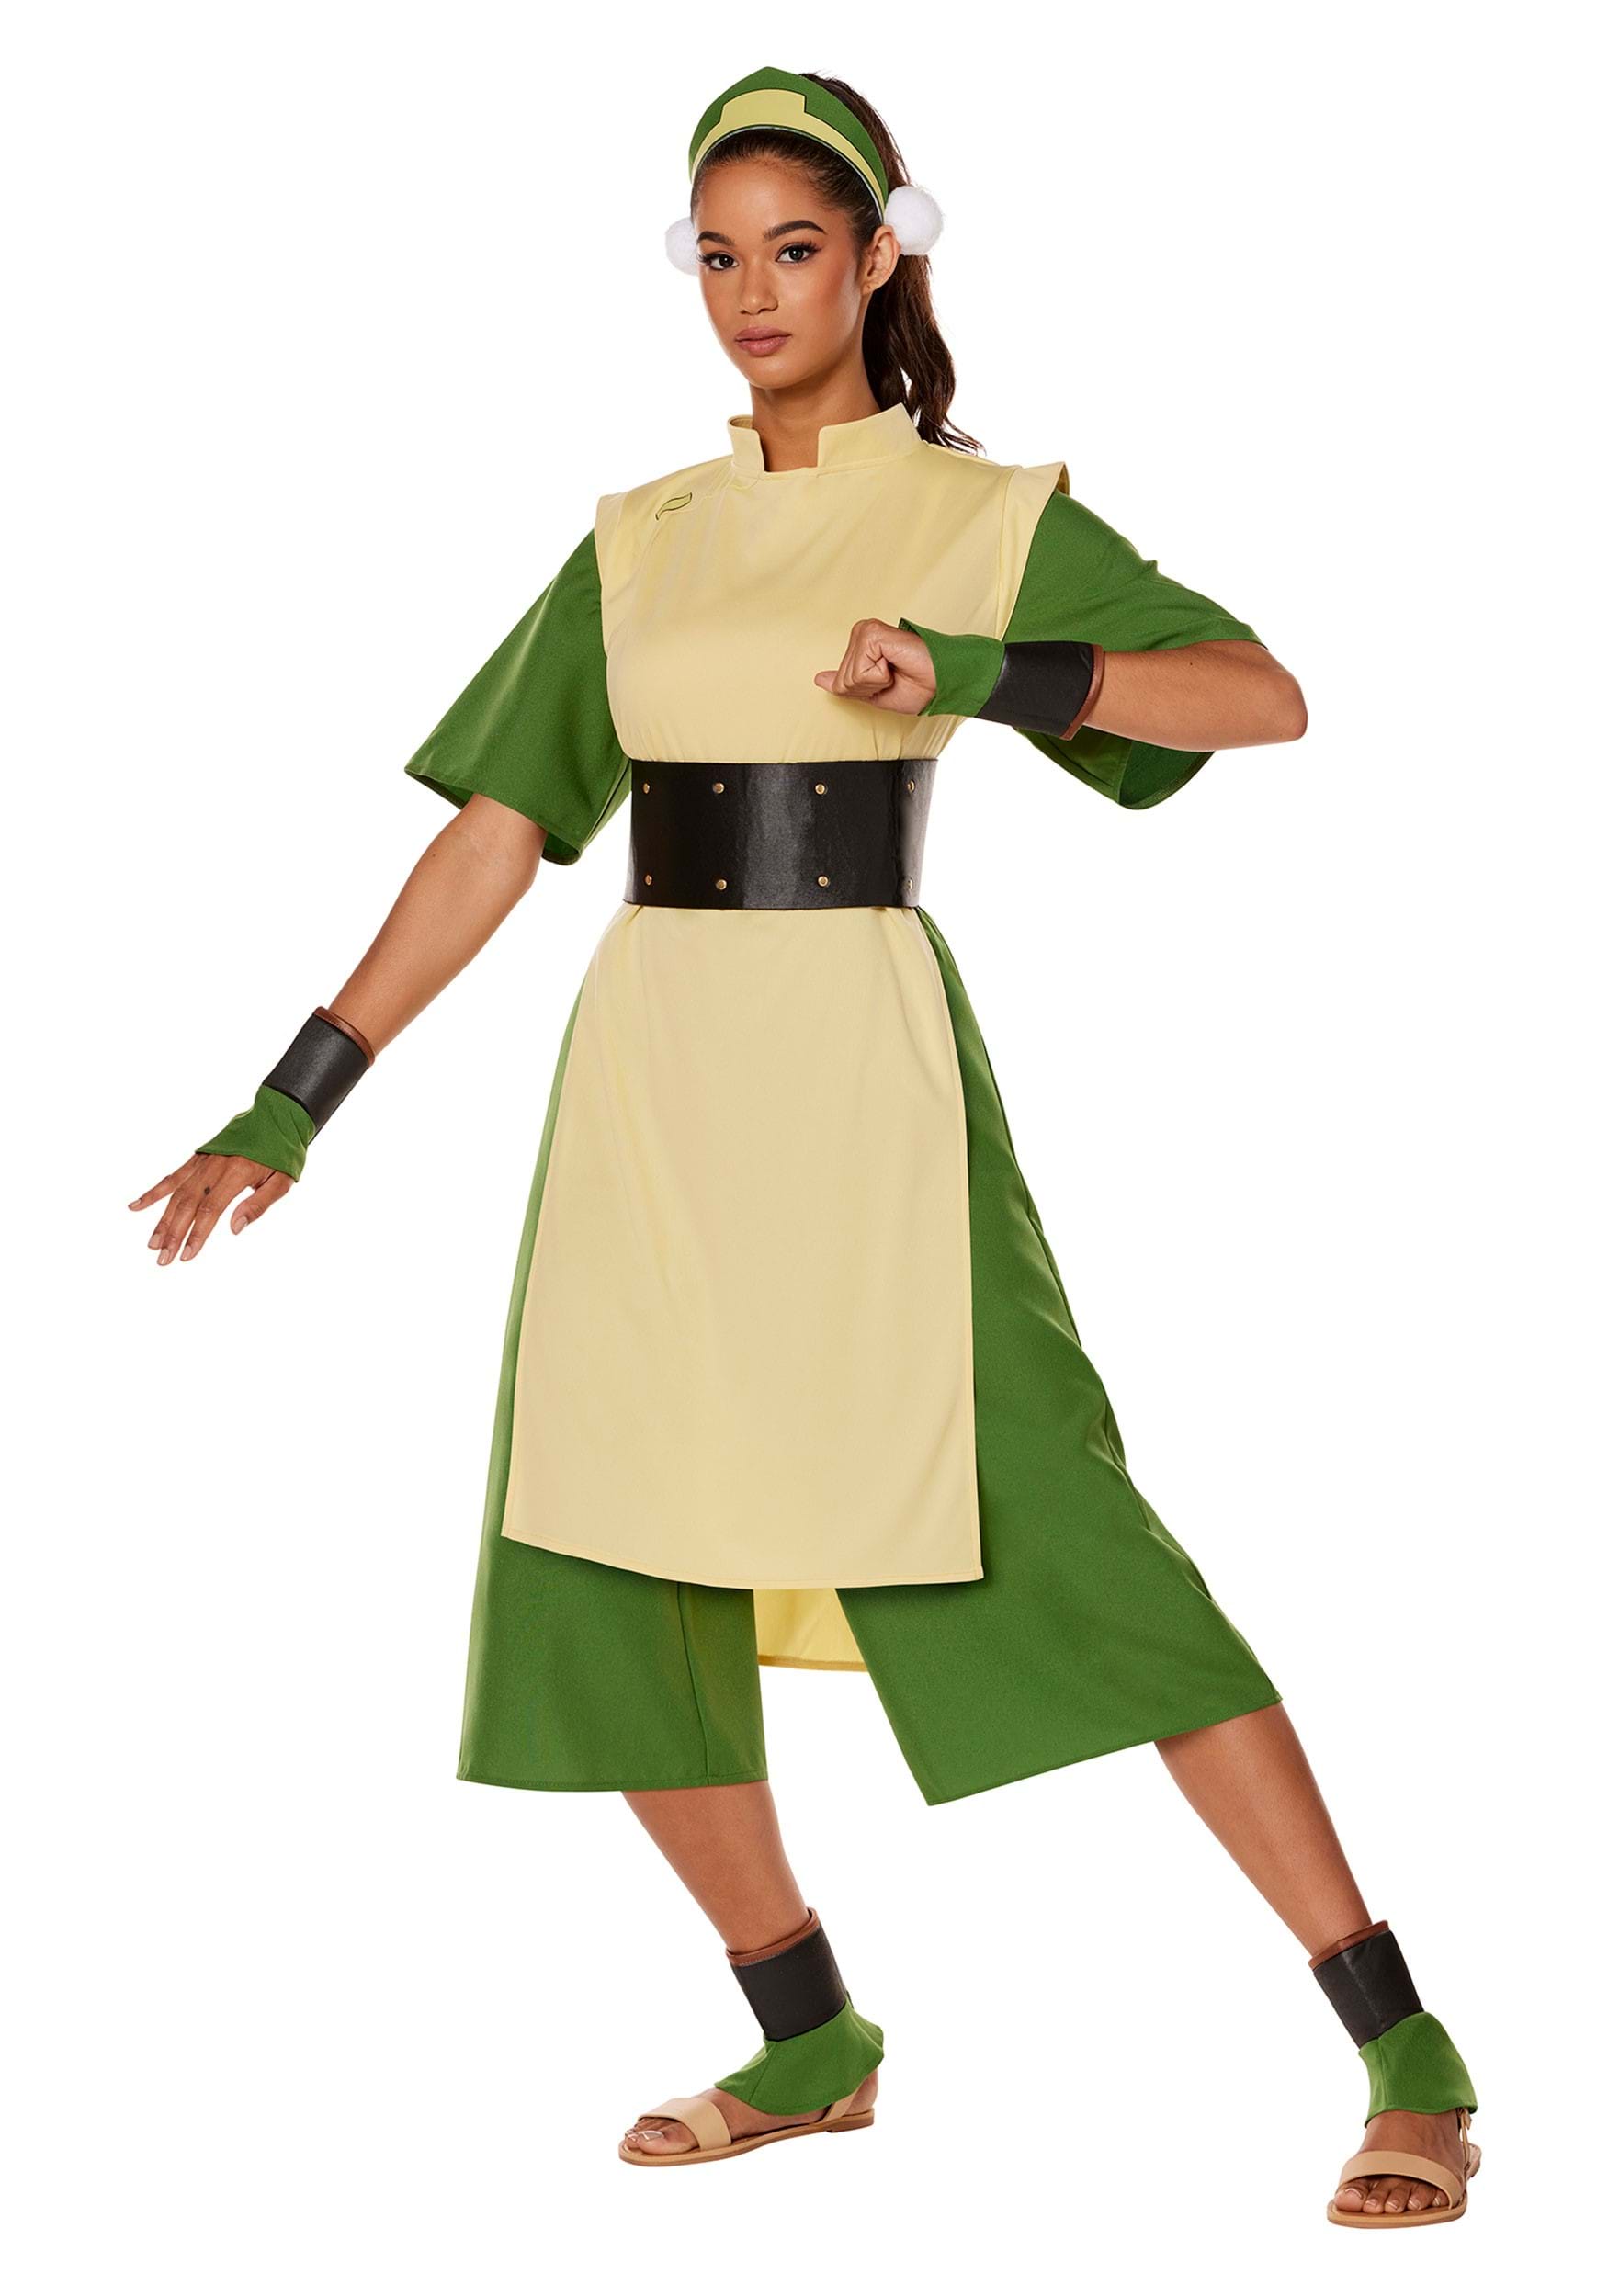 Avatar The Last Airbender Adult Toph Fancy Dress Costume , Nickelodeon Fancy Dress Costumes